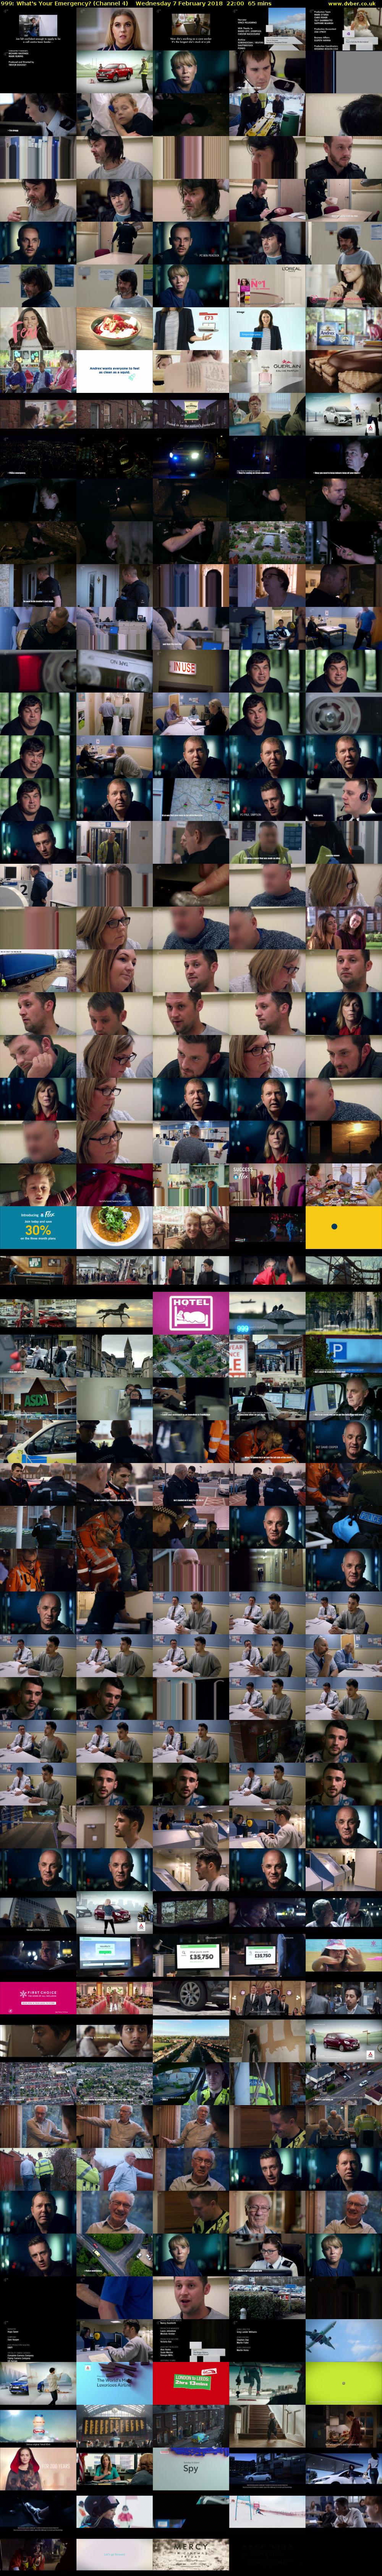 999: What's Your Emergency? (Channel 4) Wednesday 7 February 2018 22:00 - 23:05